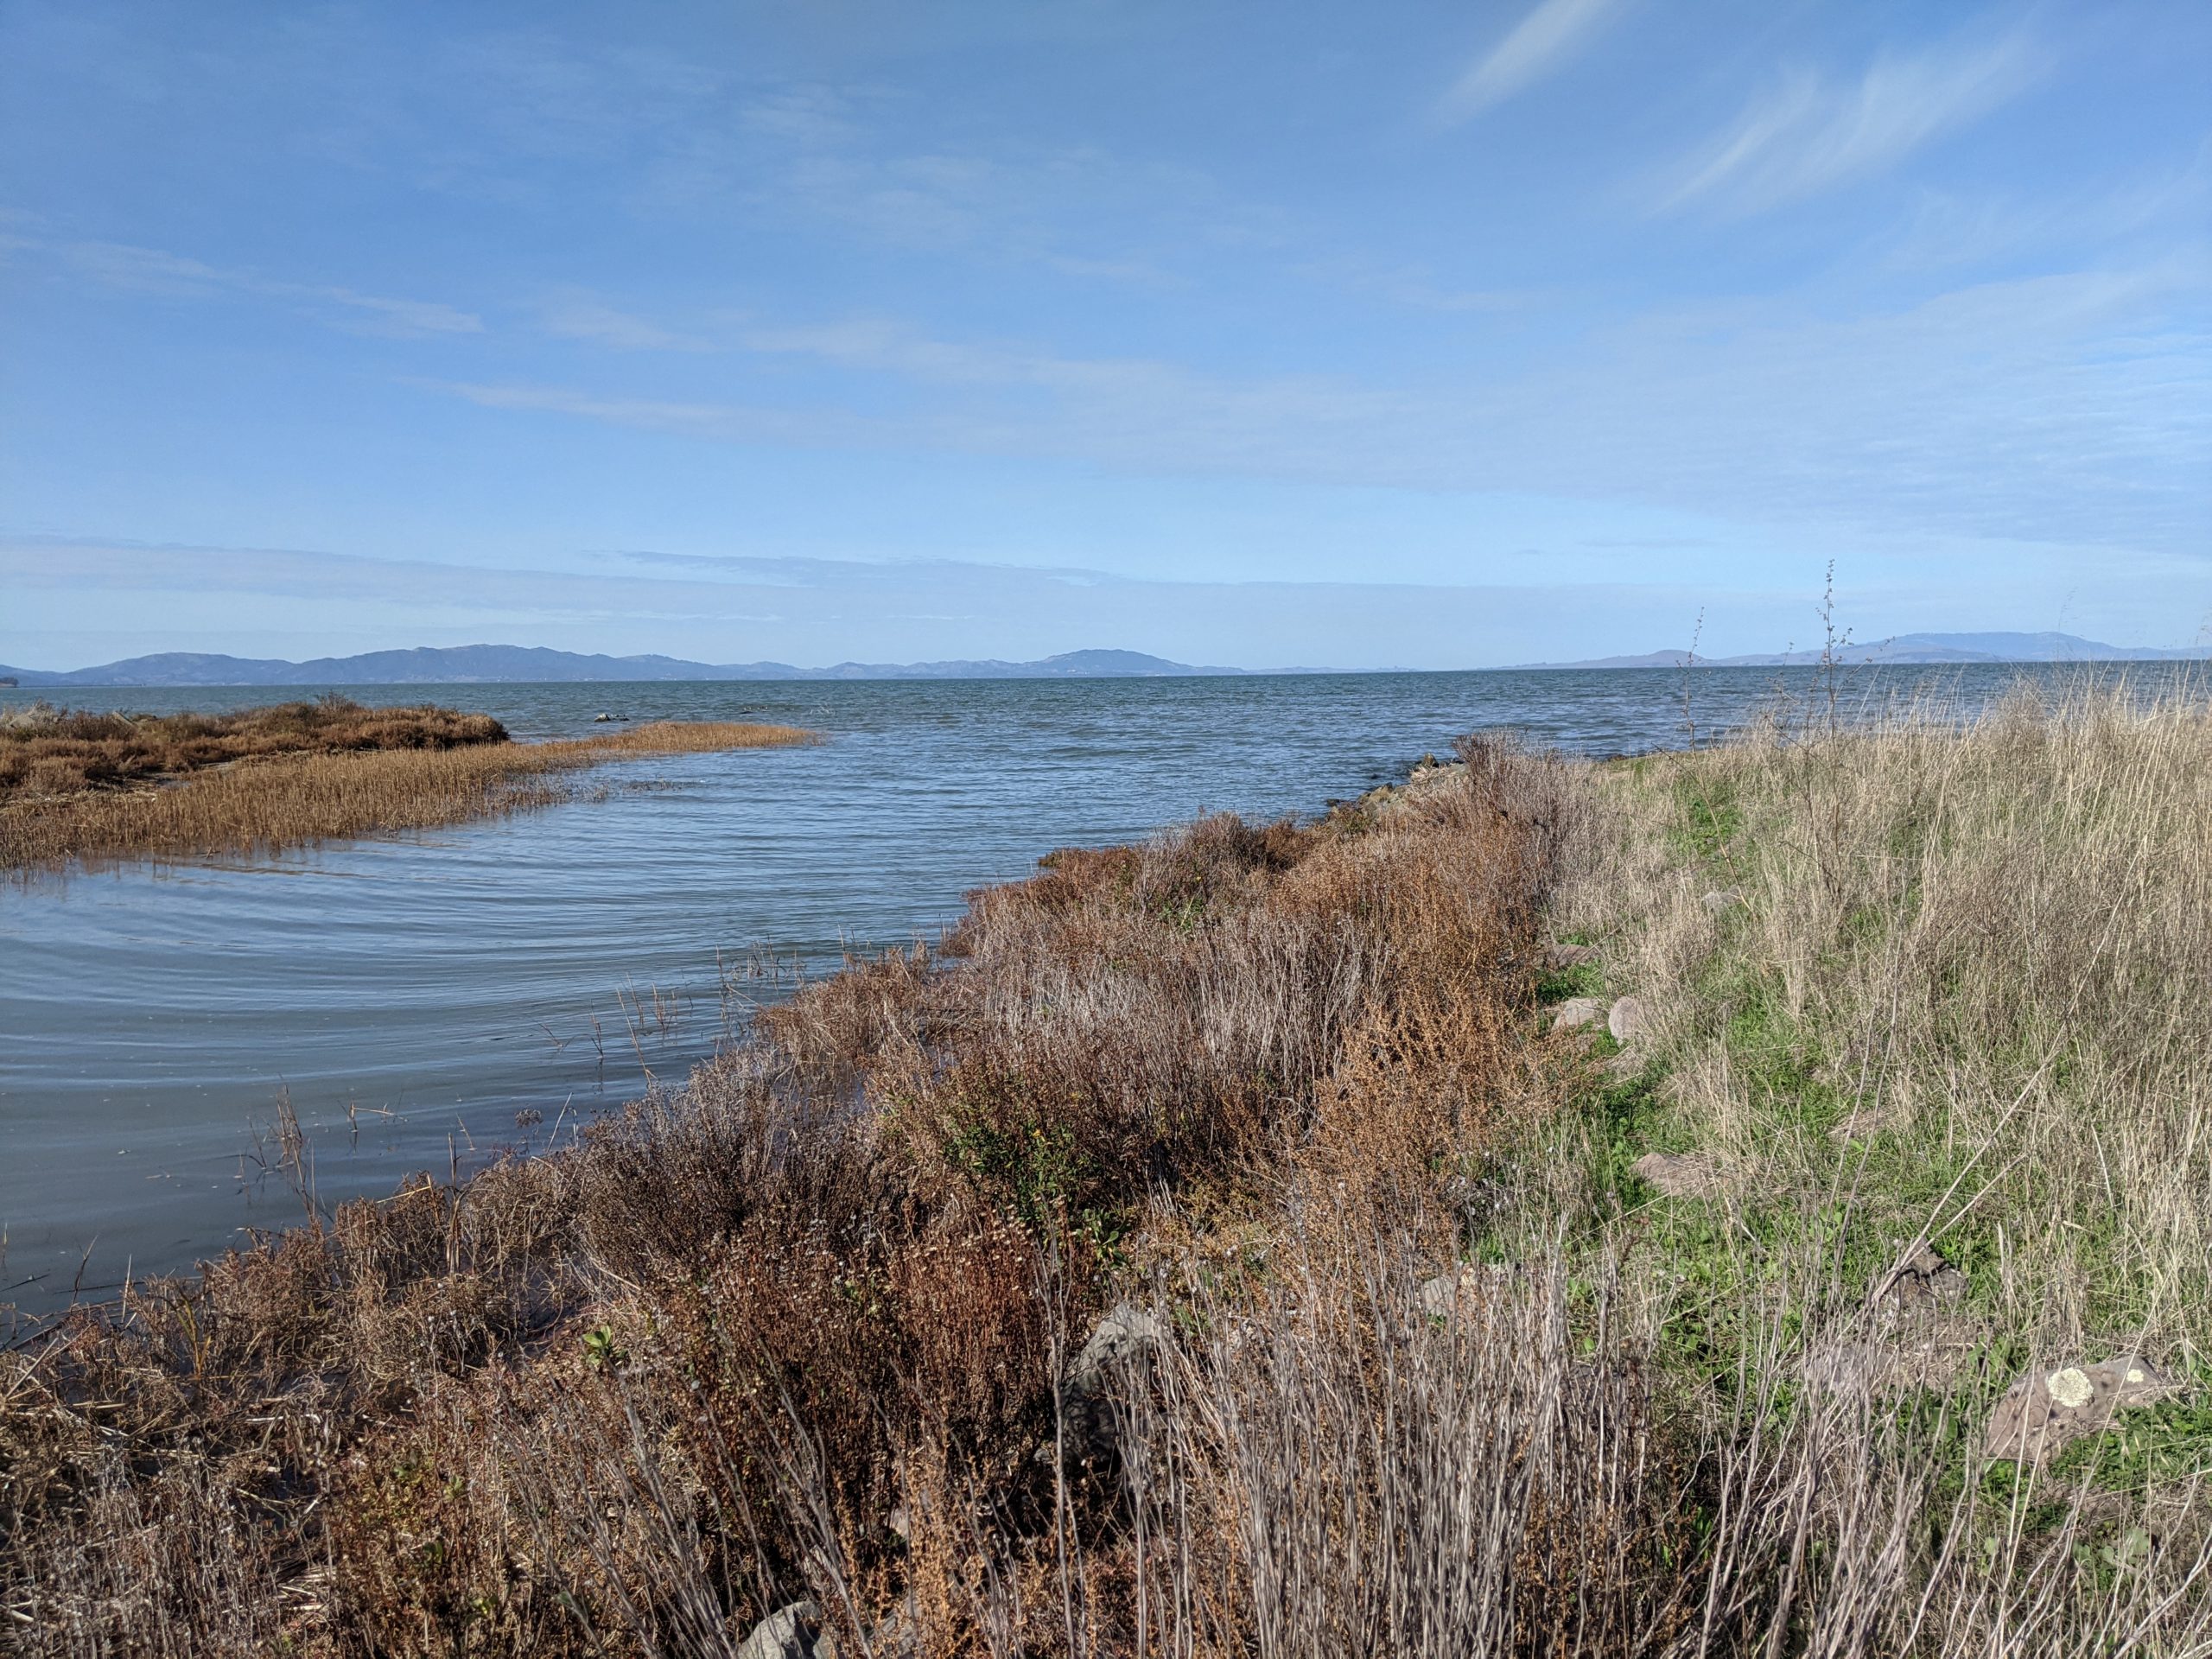 Featured image for the project, Engaging community to protect the Pinole Creek Watershed: Assessment of trash impacts to promote a thriving ecosystem